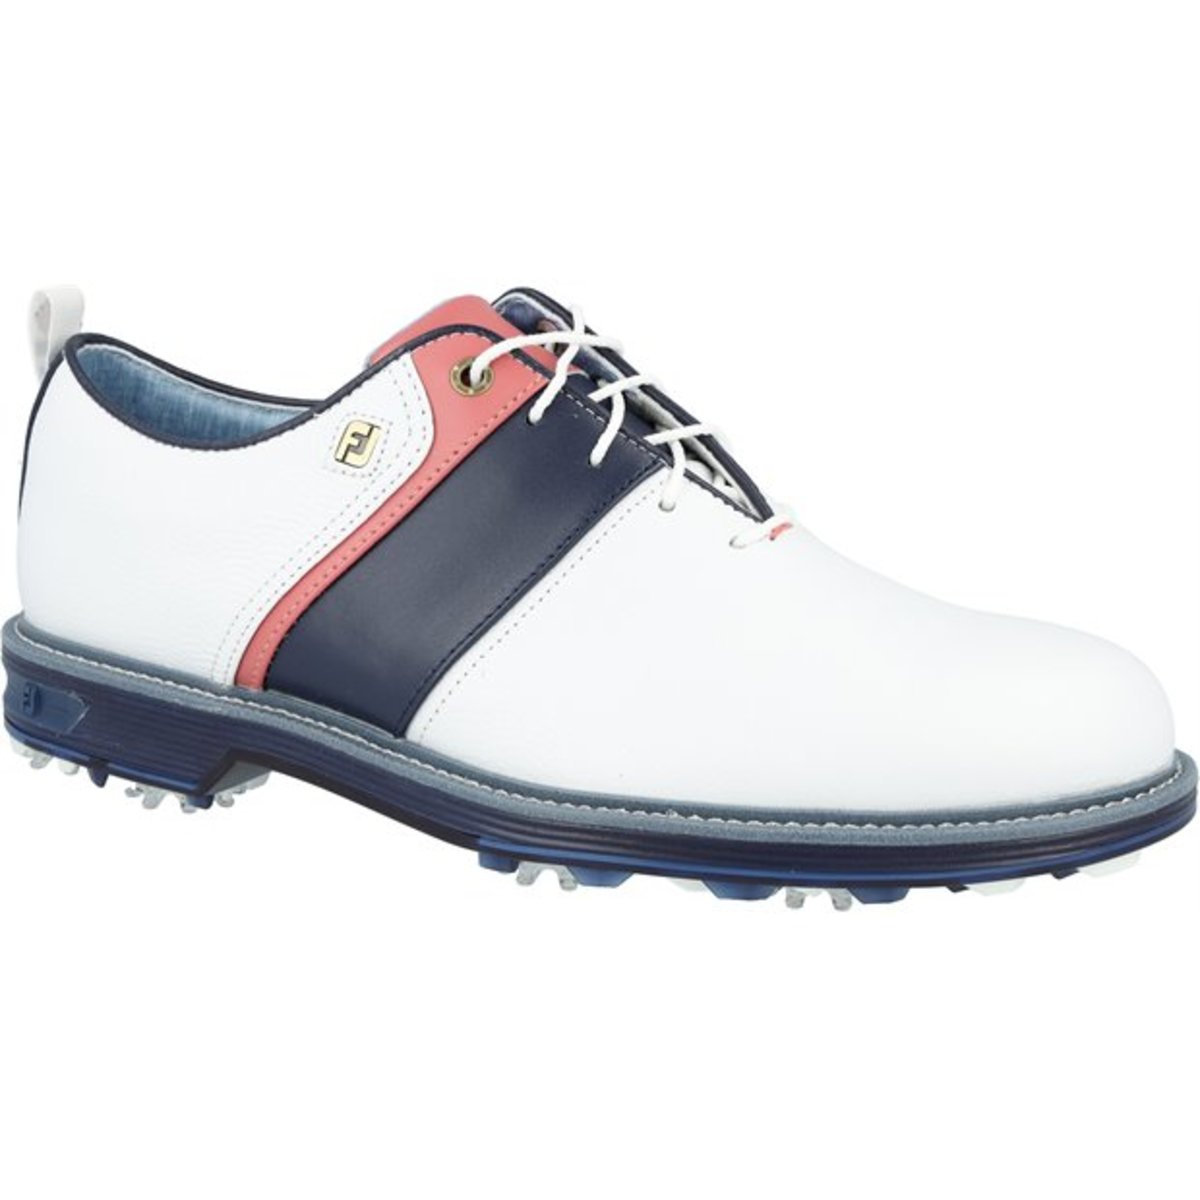 Shop FootJoy golf shoes for men and women on Sports Illustrated Golf.